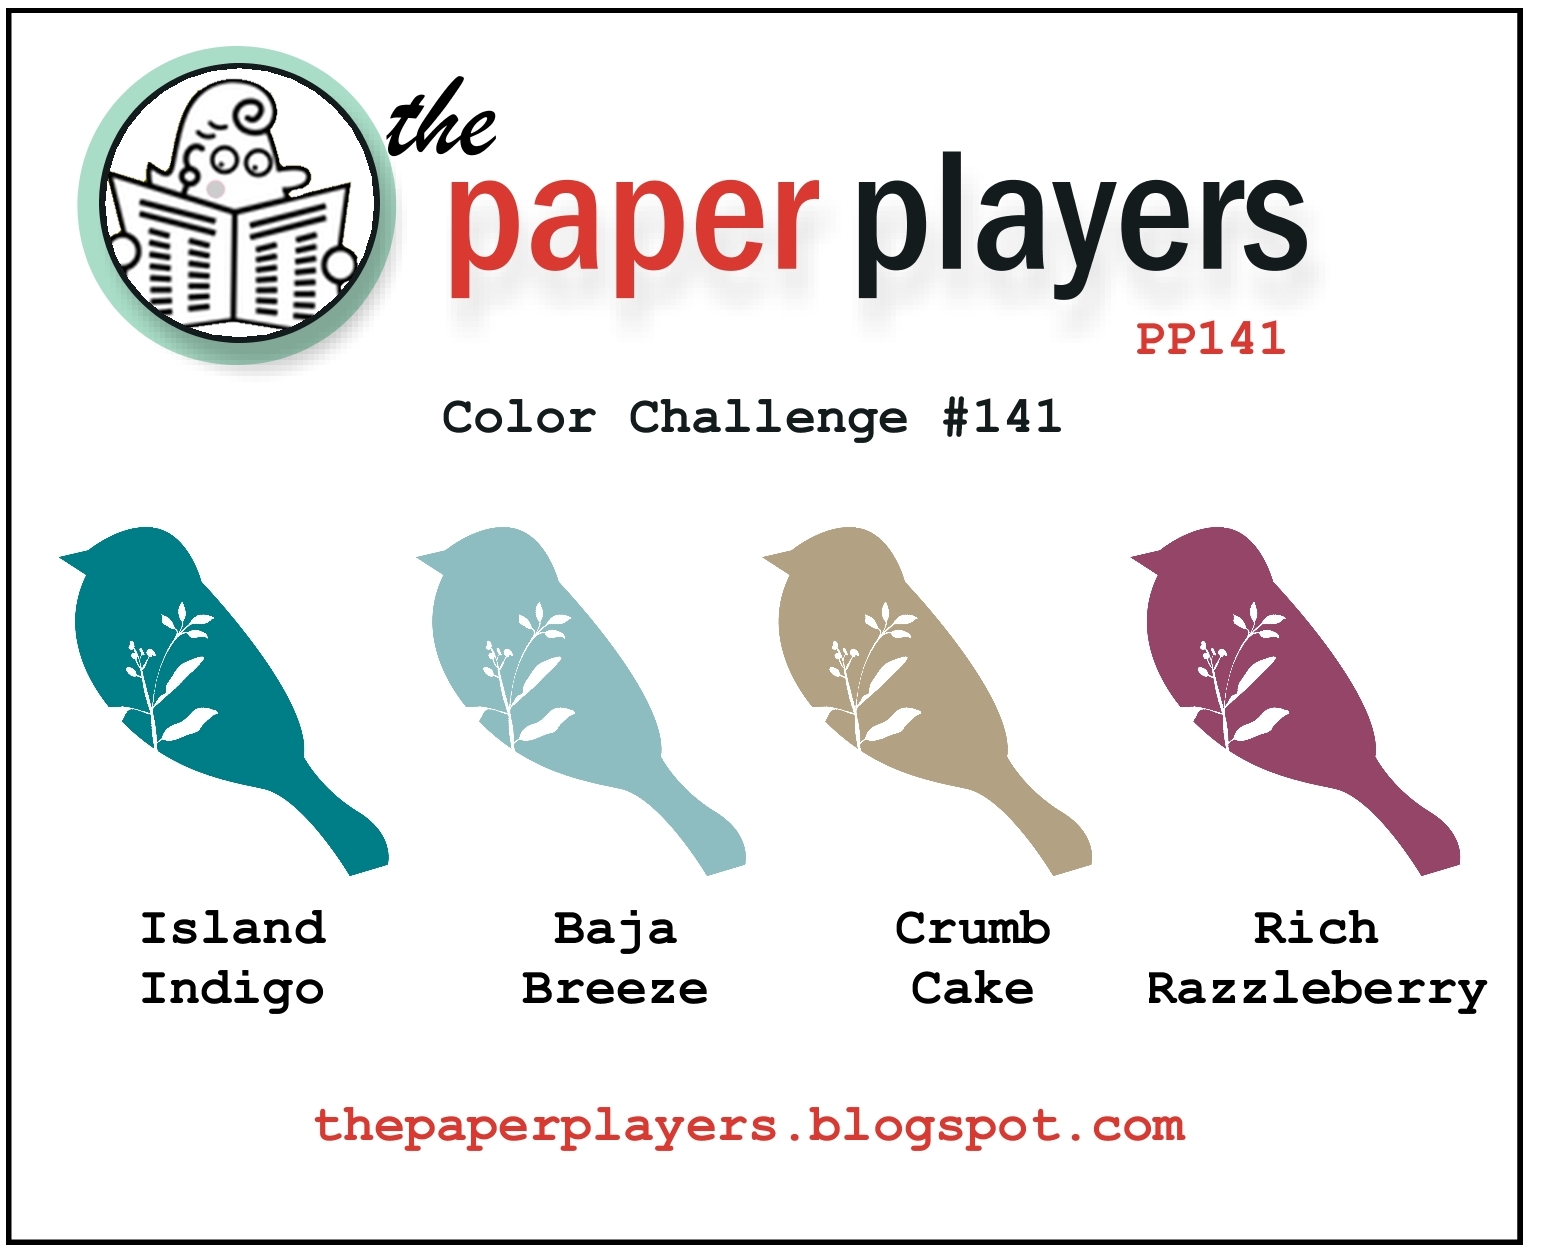 Paper plays. @Player_141.